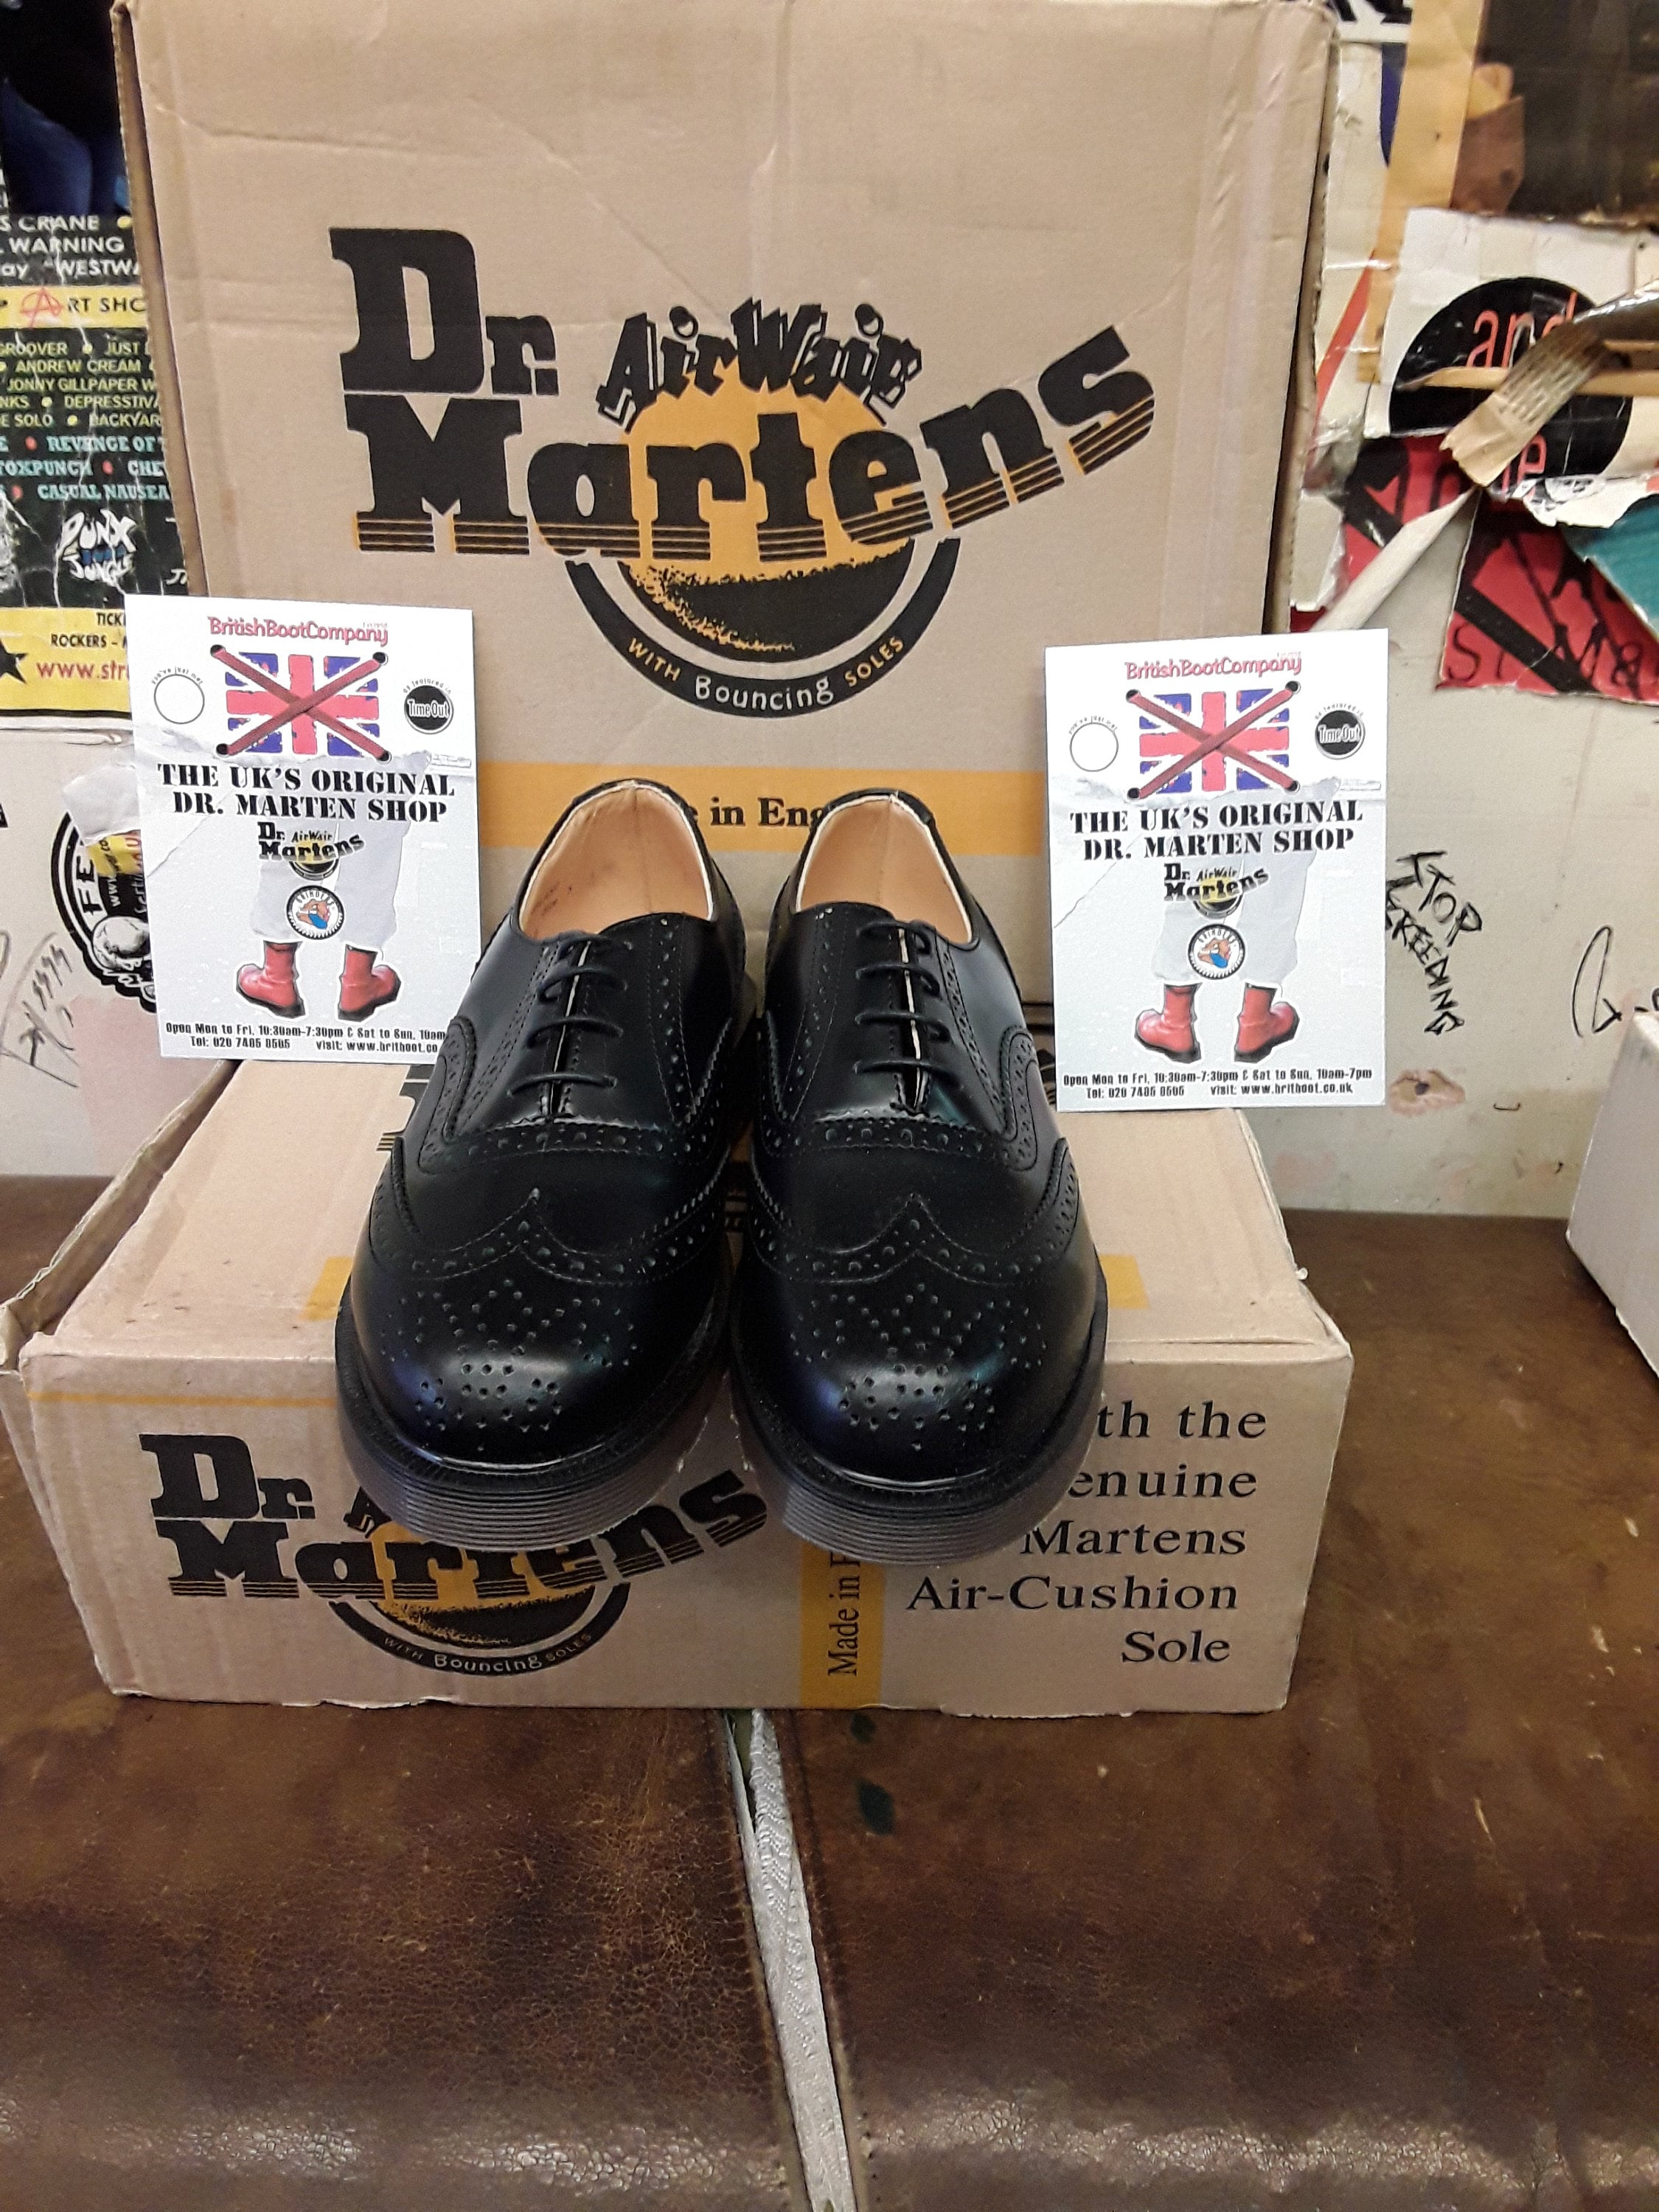 chaos Bedienen Redelijk Dr Martens 2035 Made in England Black Brogues Various Sizes - Etsy